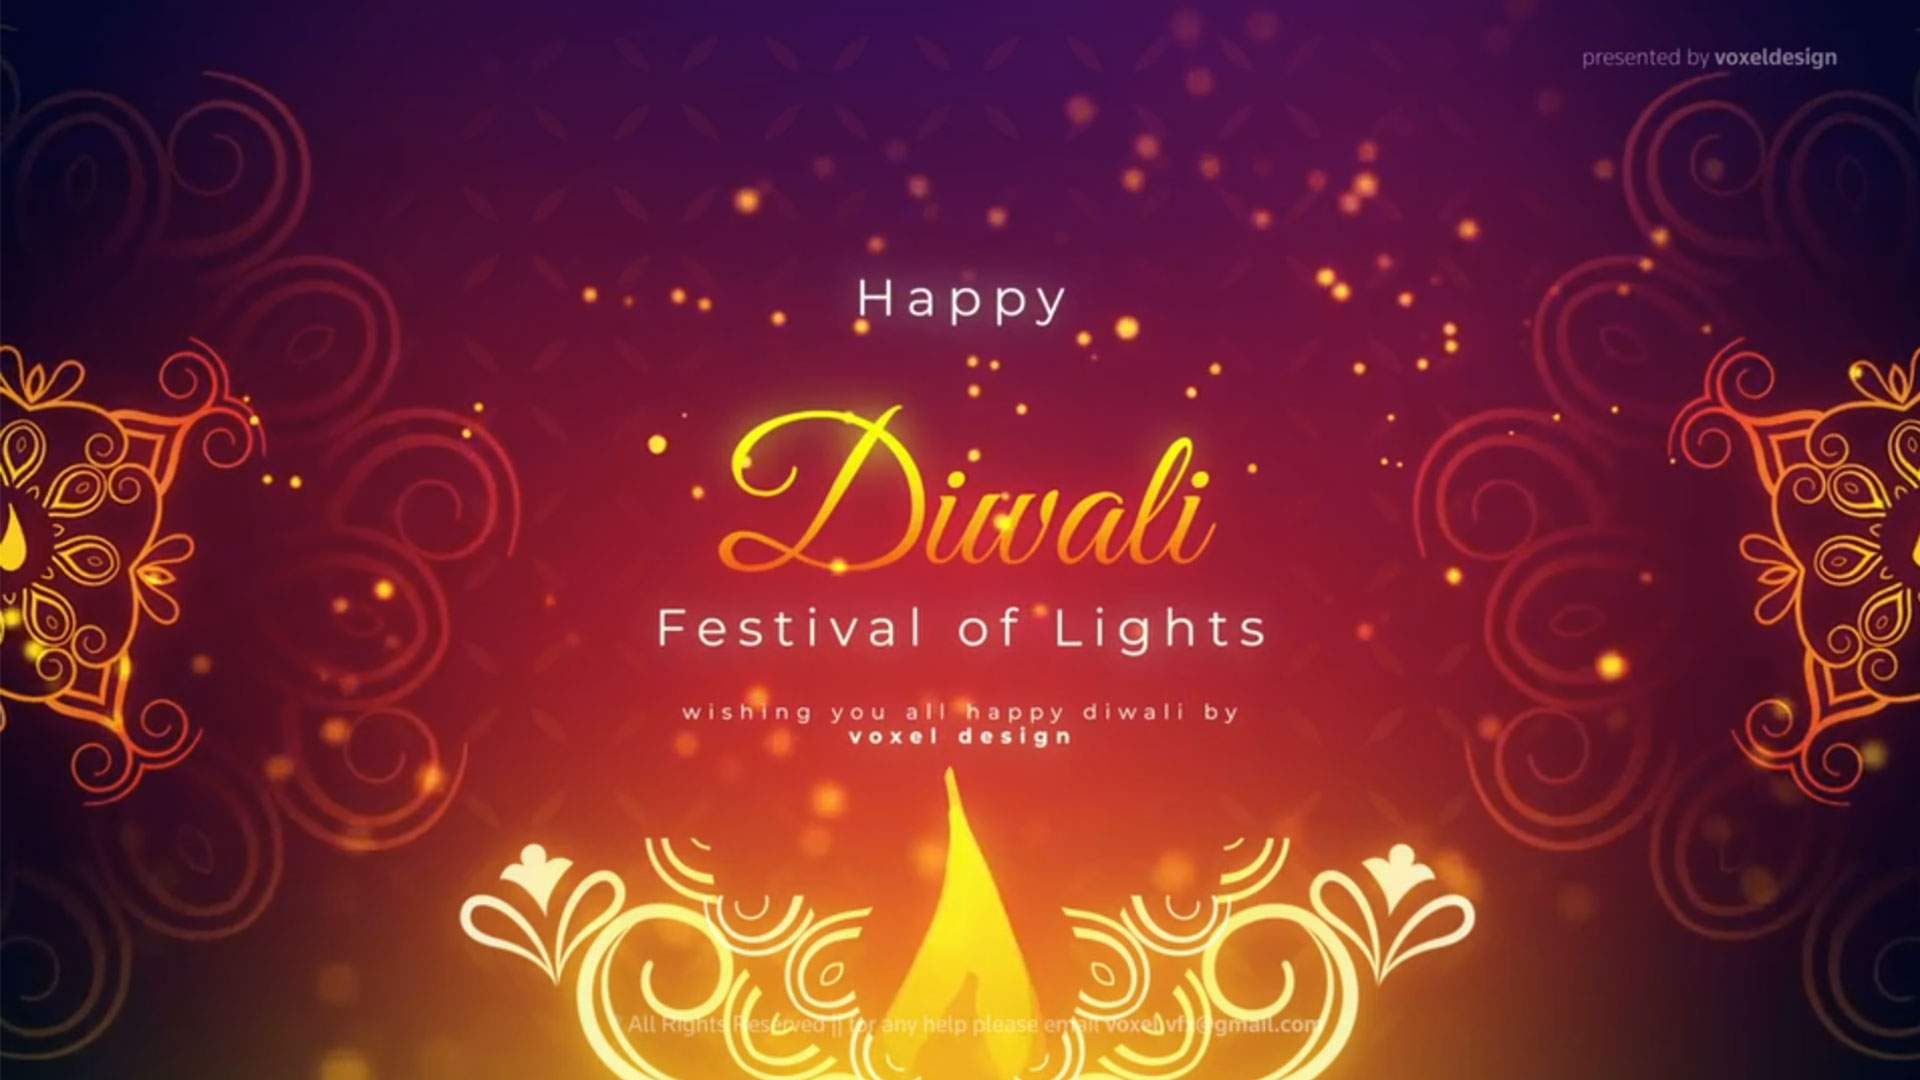 diwali openers after effects template free download